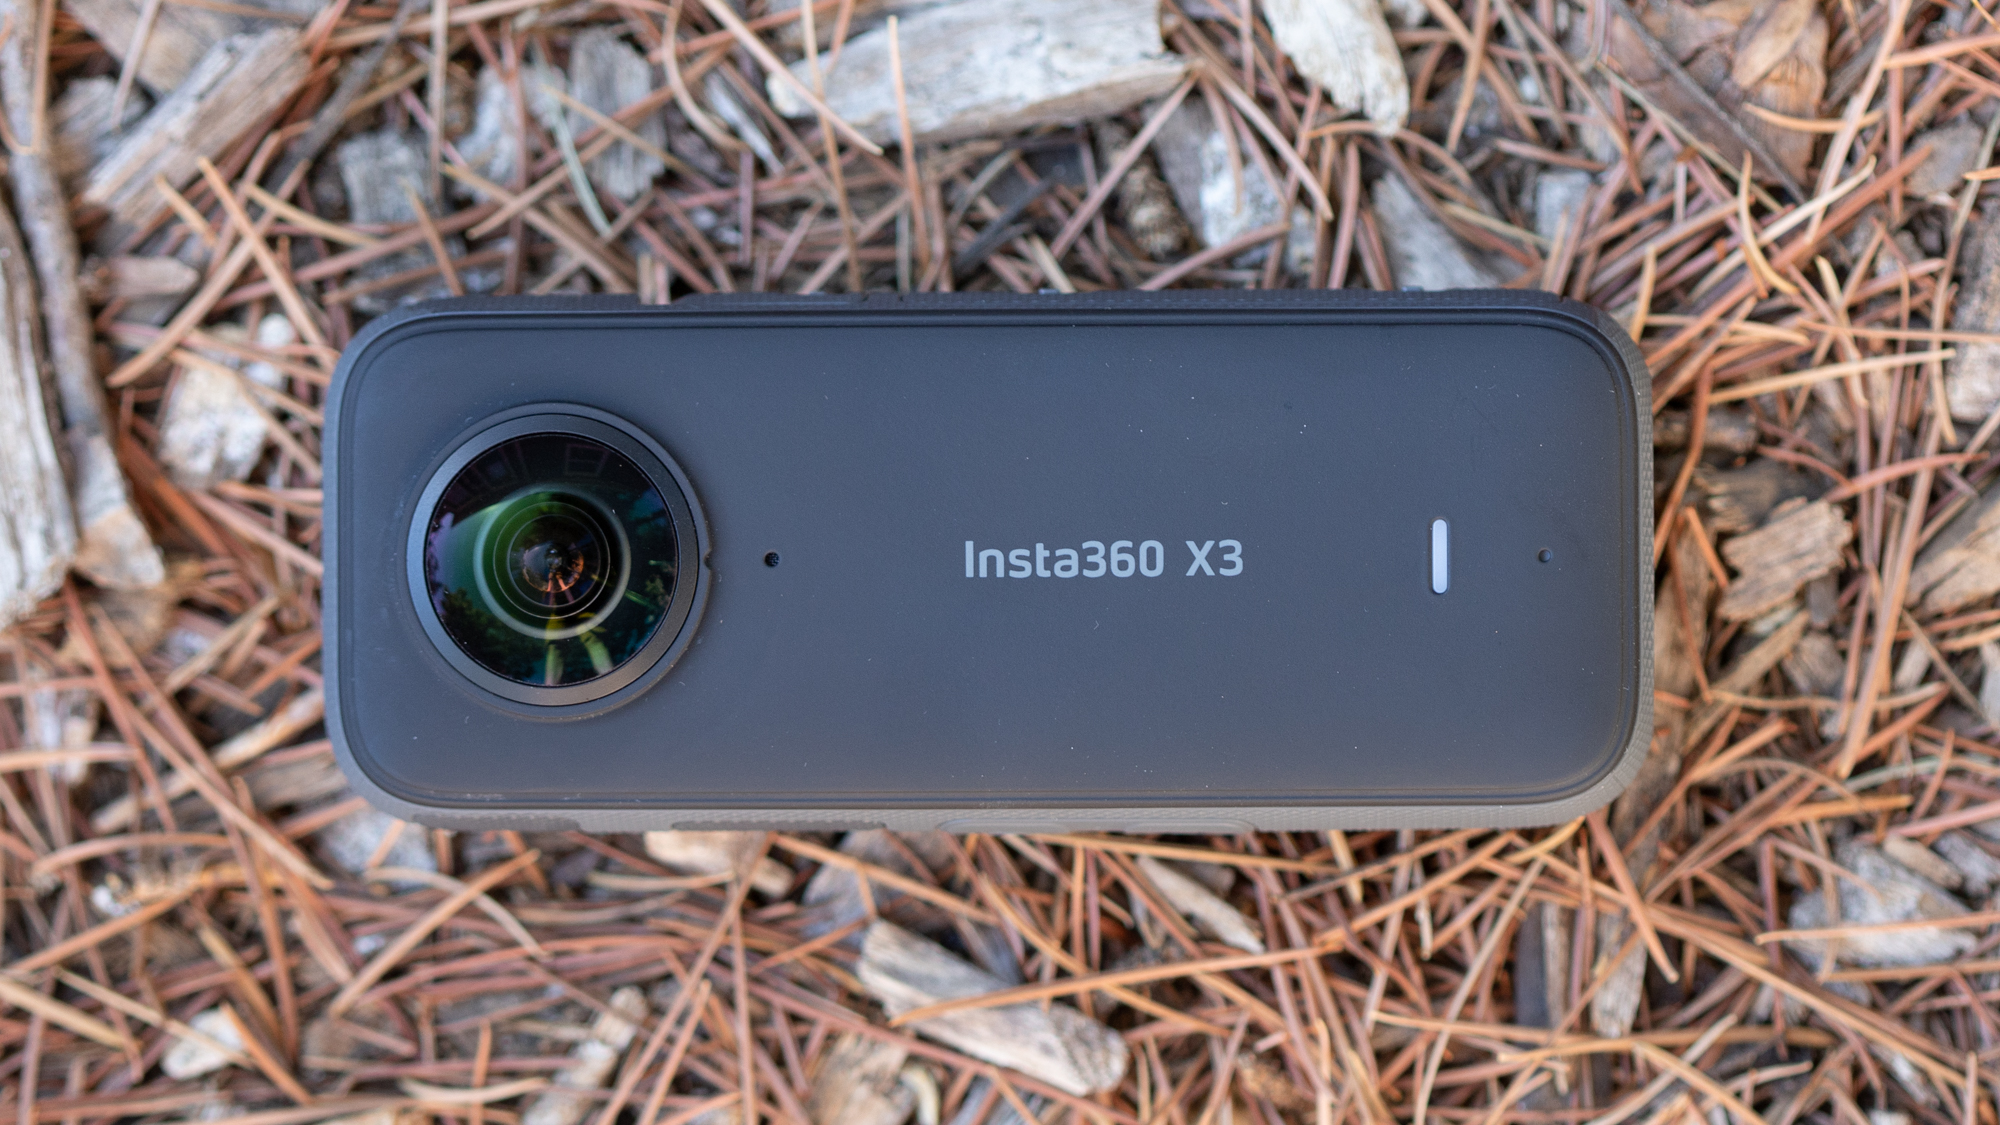 Insta360 X3 action camera review: Better than a GoPro for general users